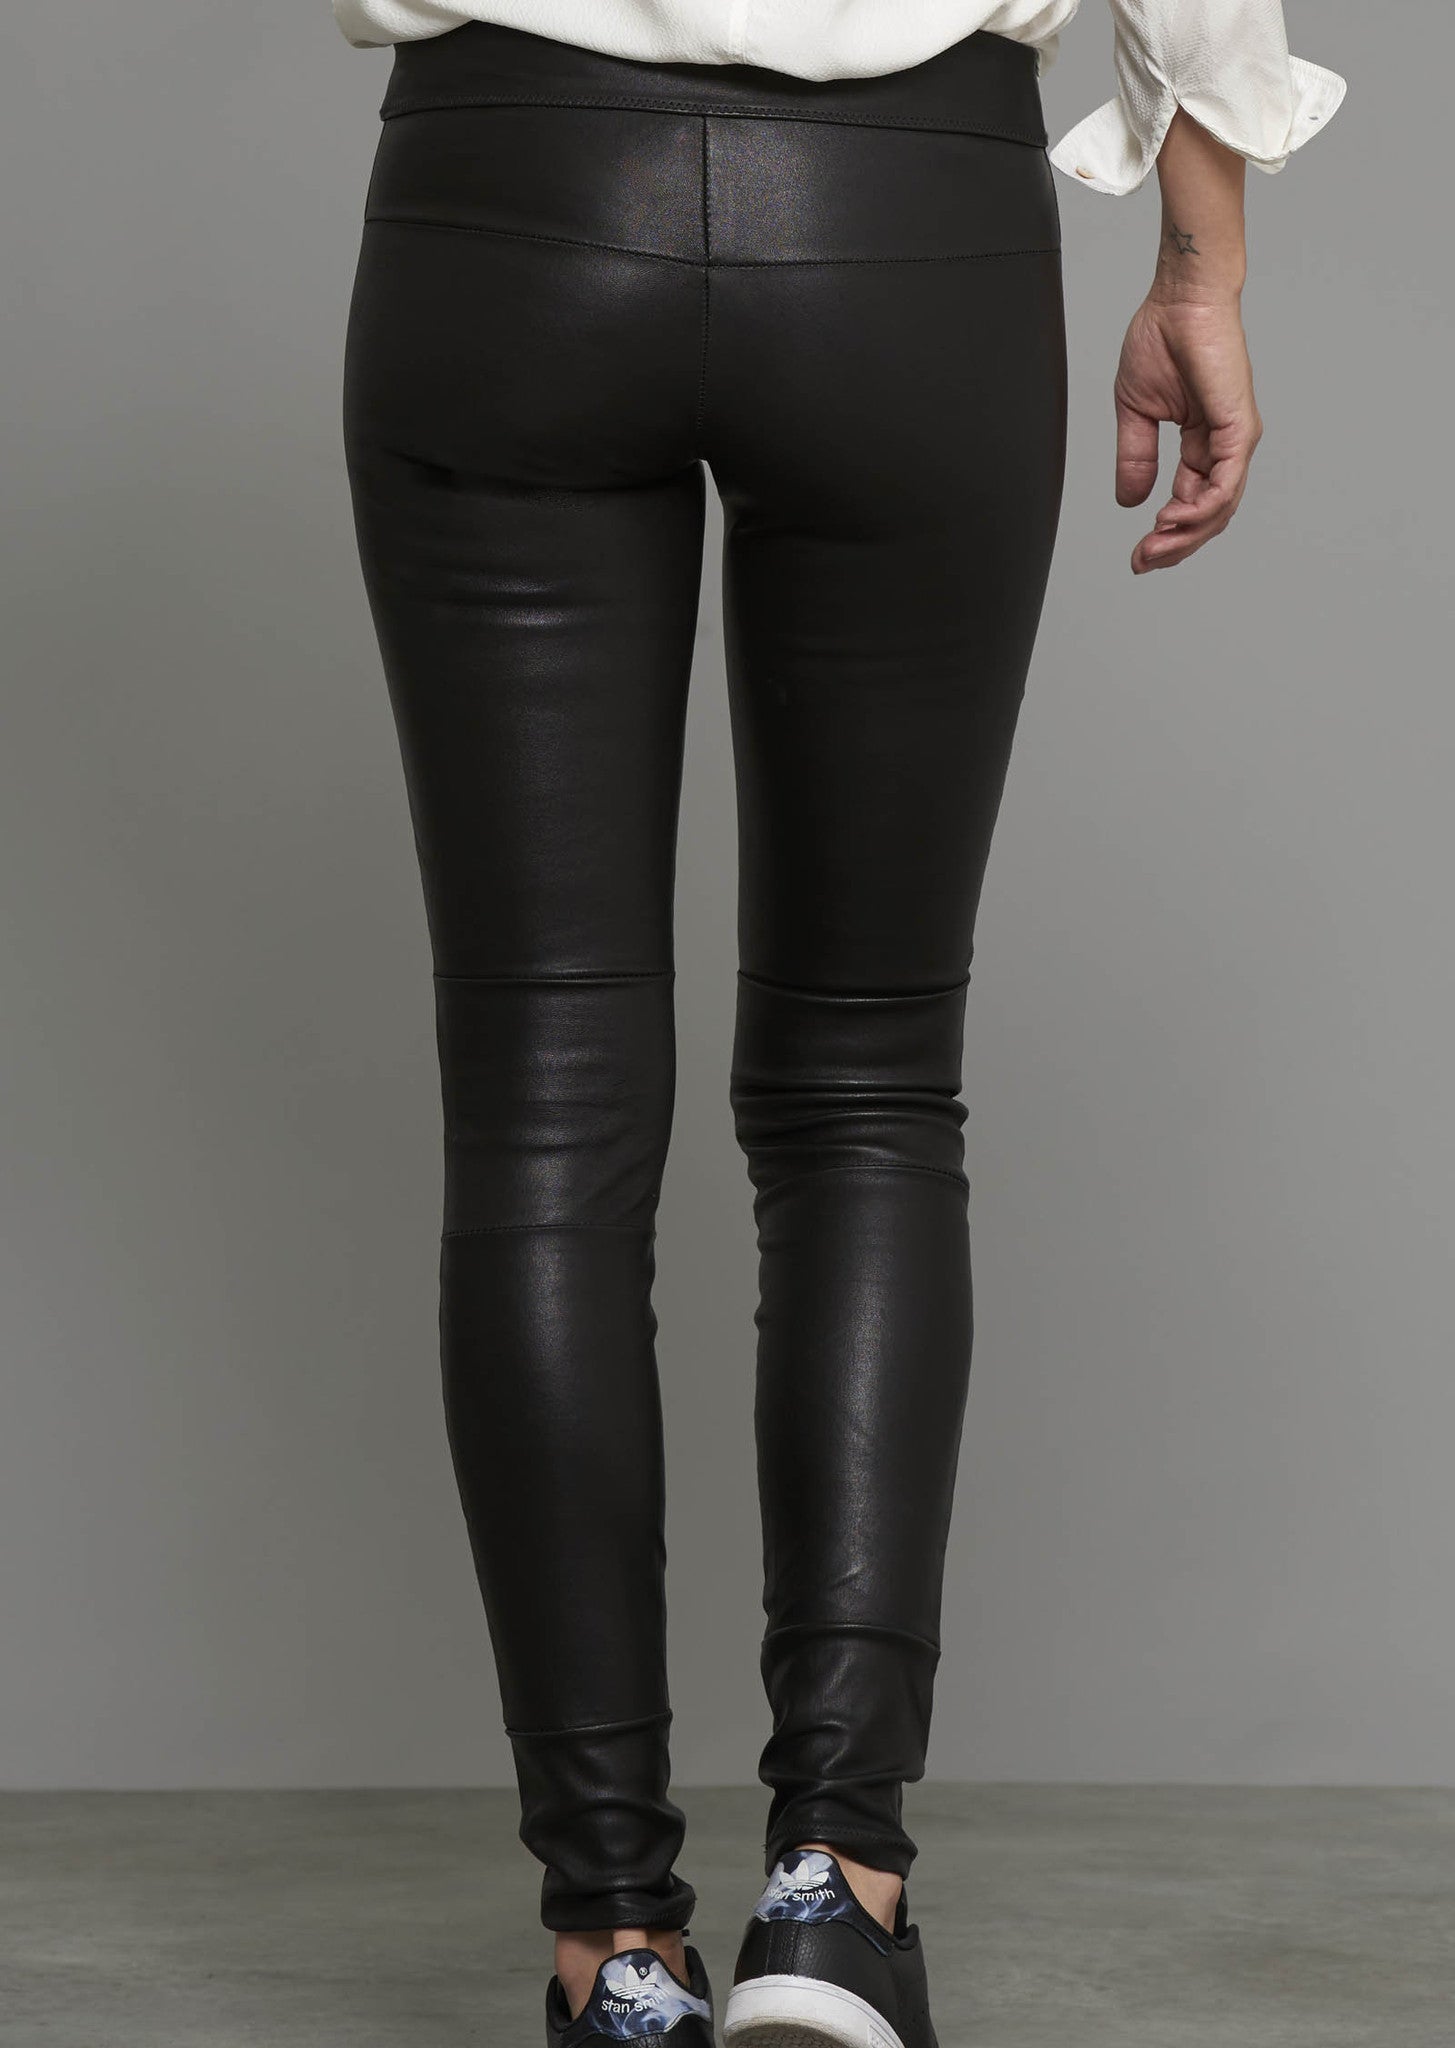 Black Faux Leather Leggings with Folded Waistband